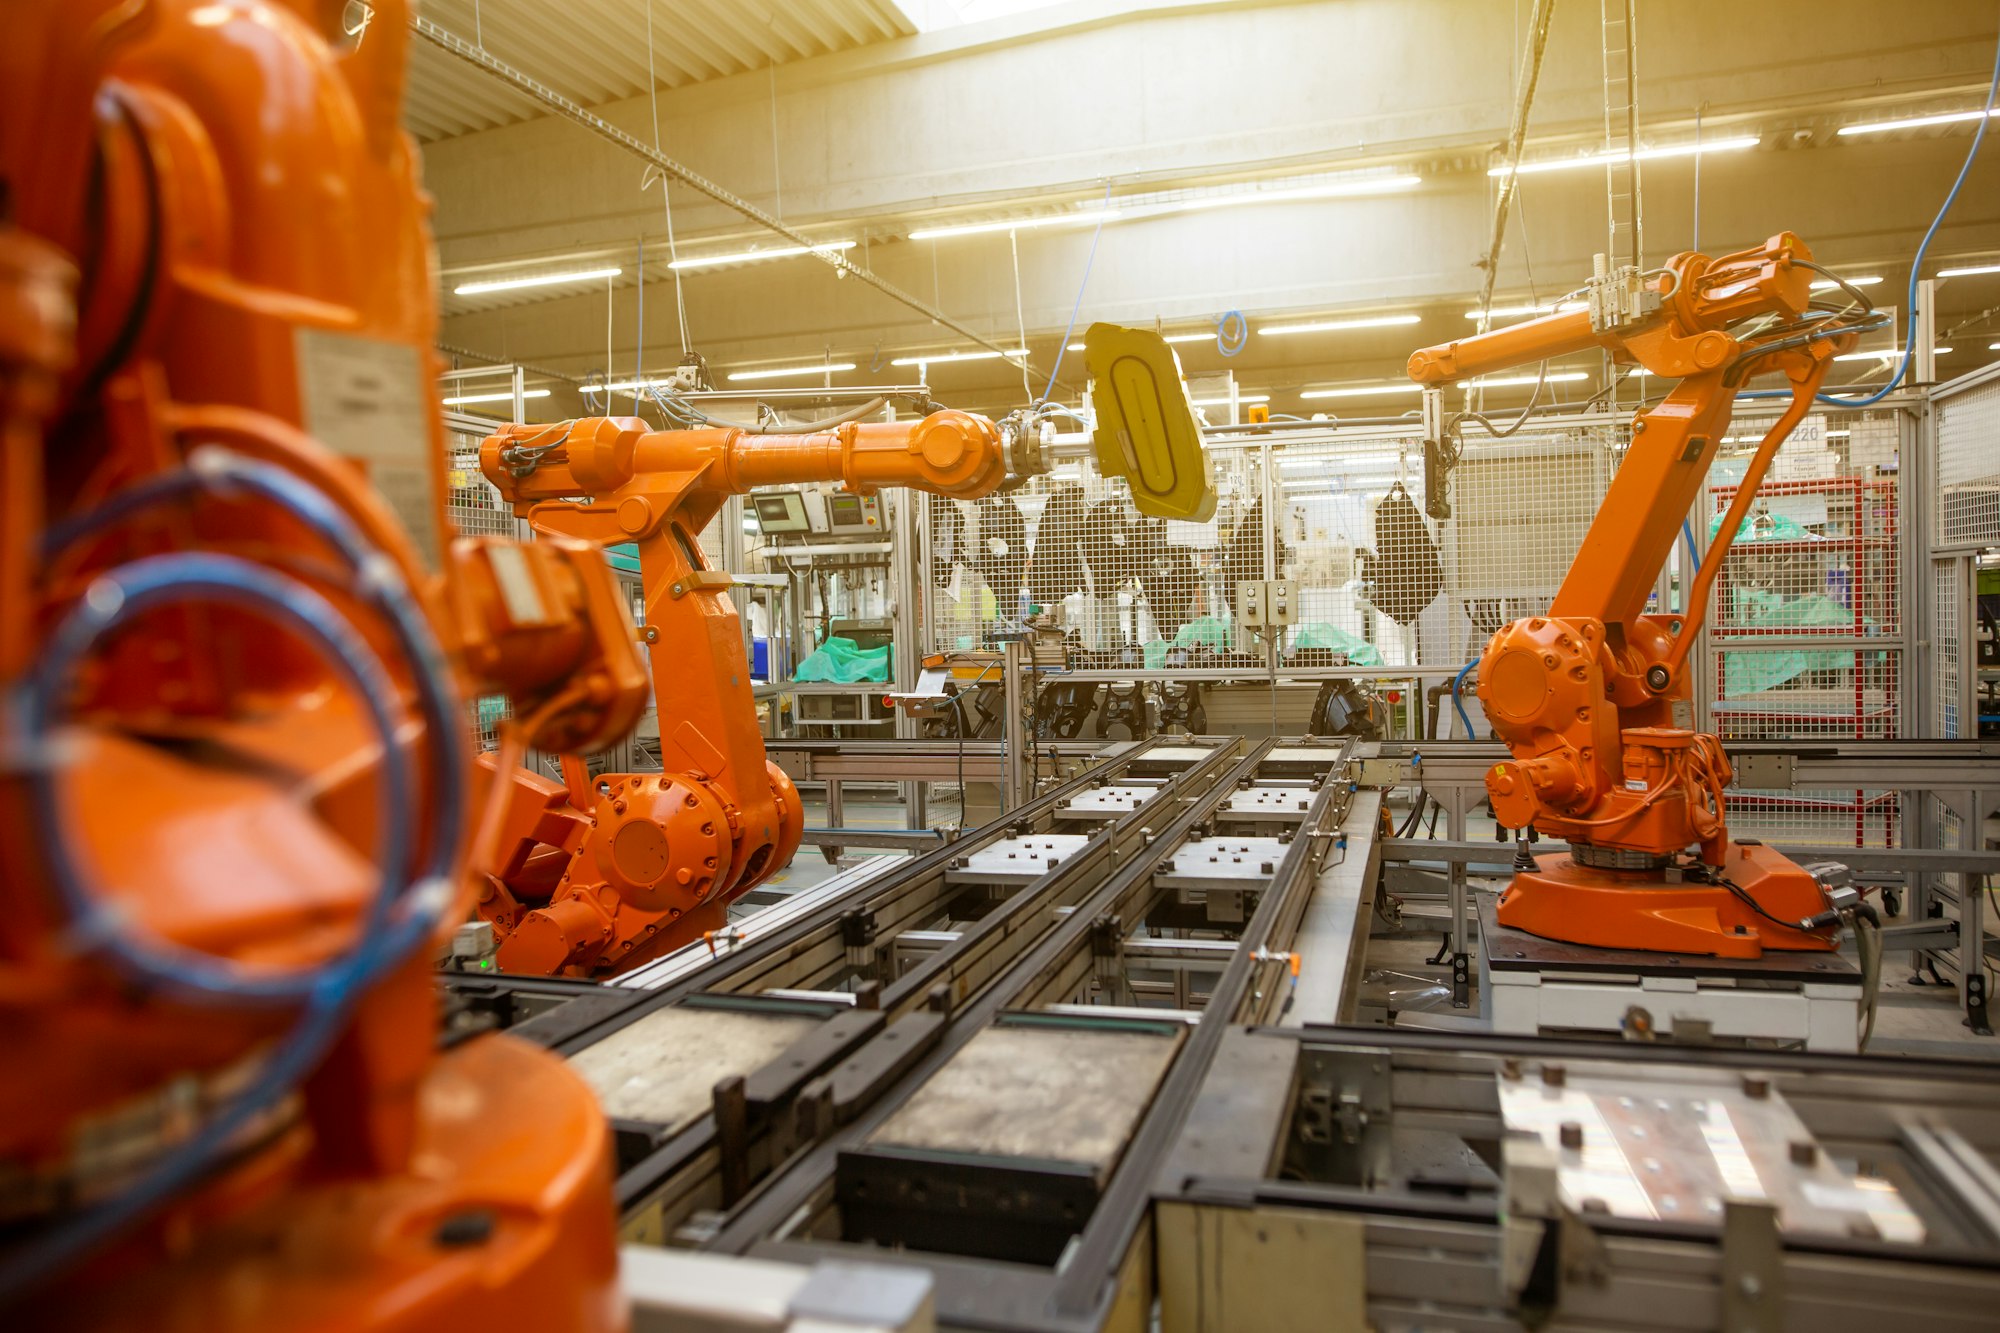 Automatic robots in the industrial factory for assembly automotive products, automotive concept